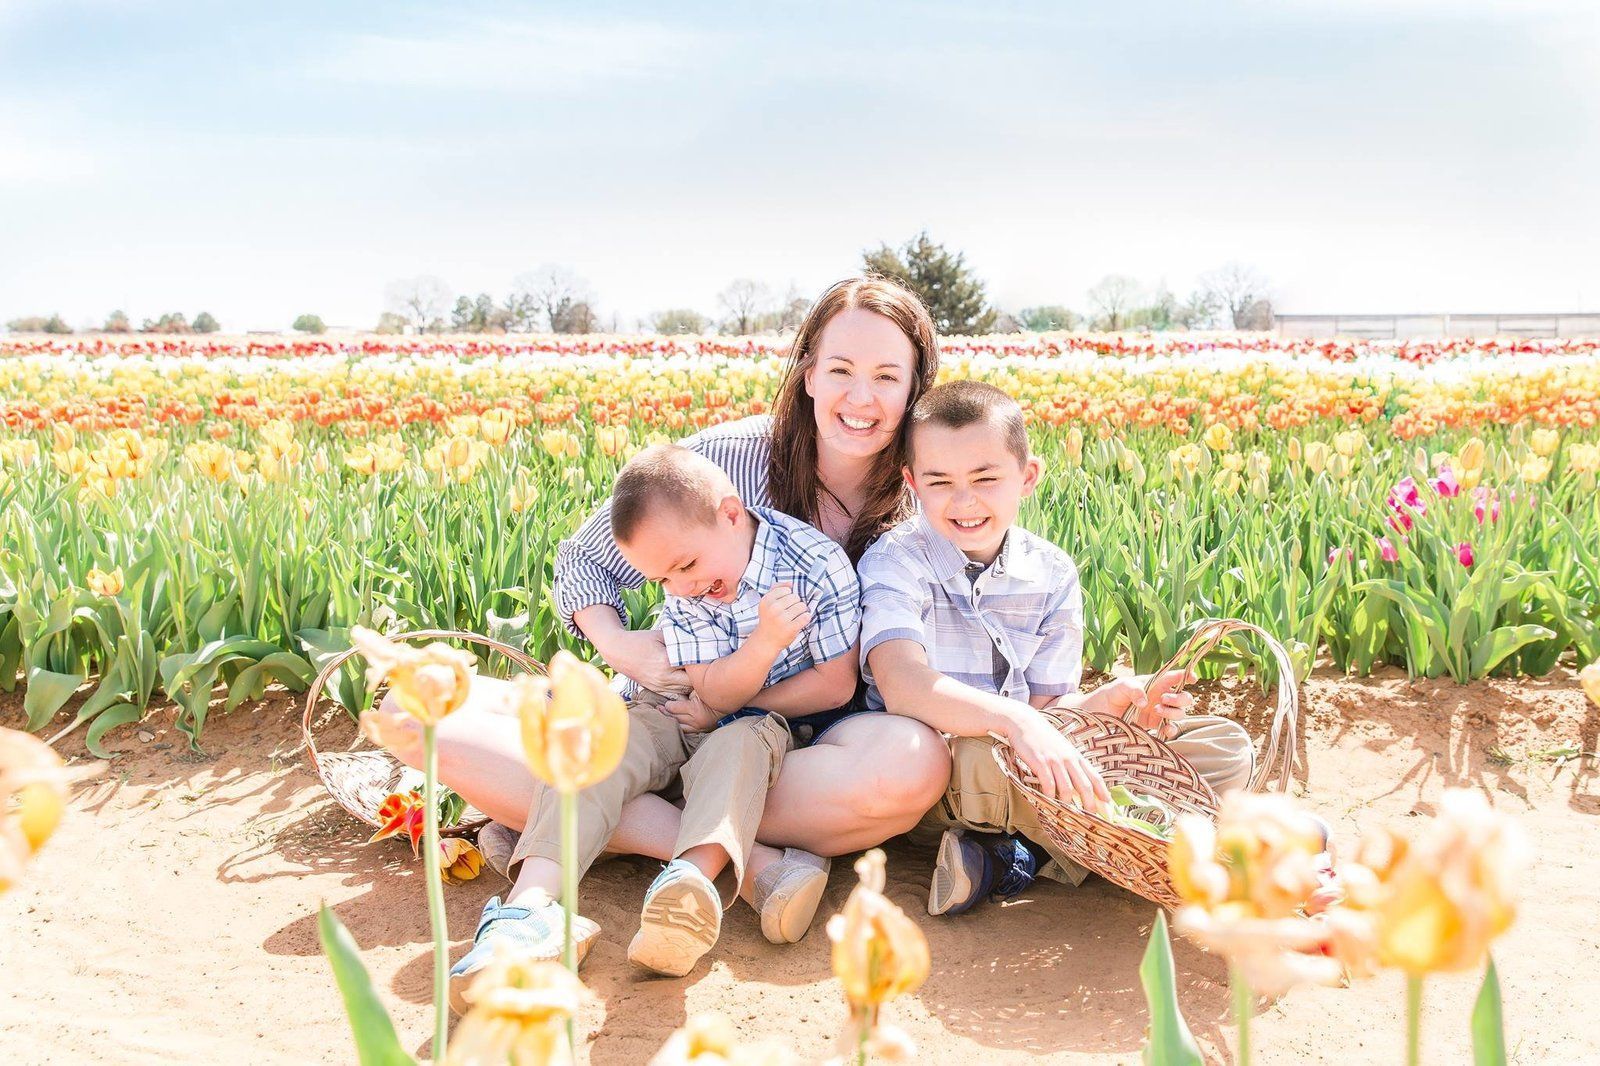 A woman and two children are sitting in a field of flowers.